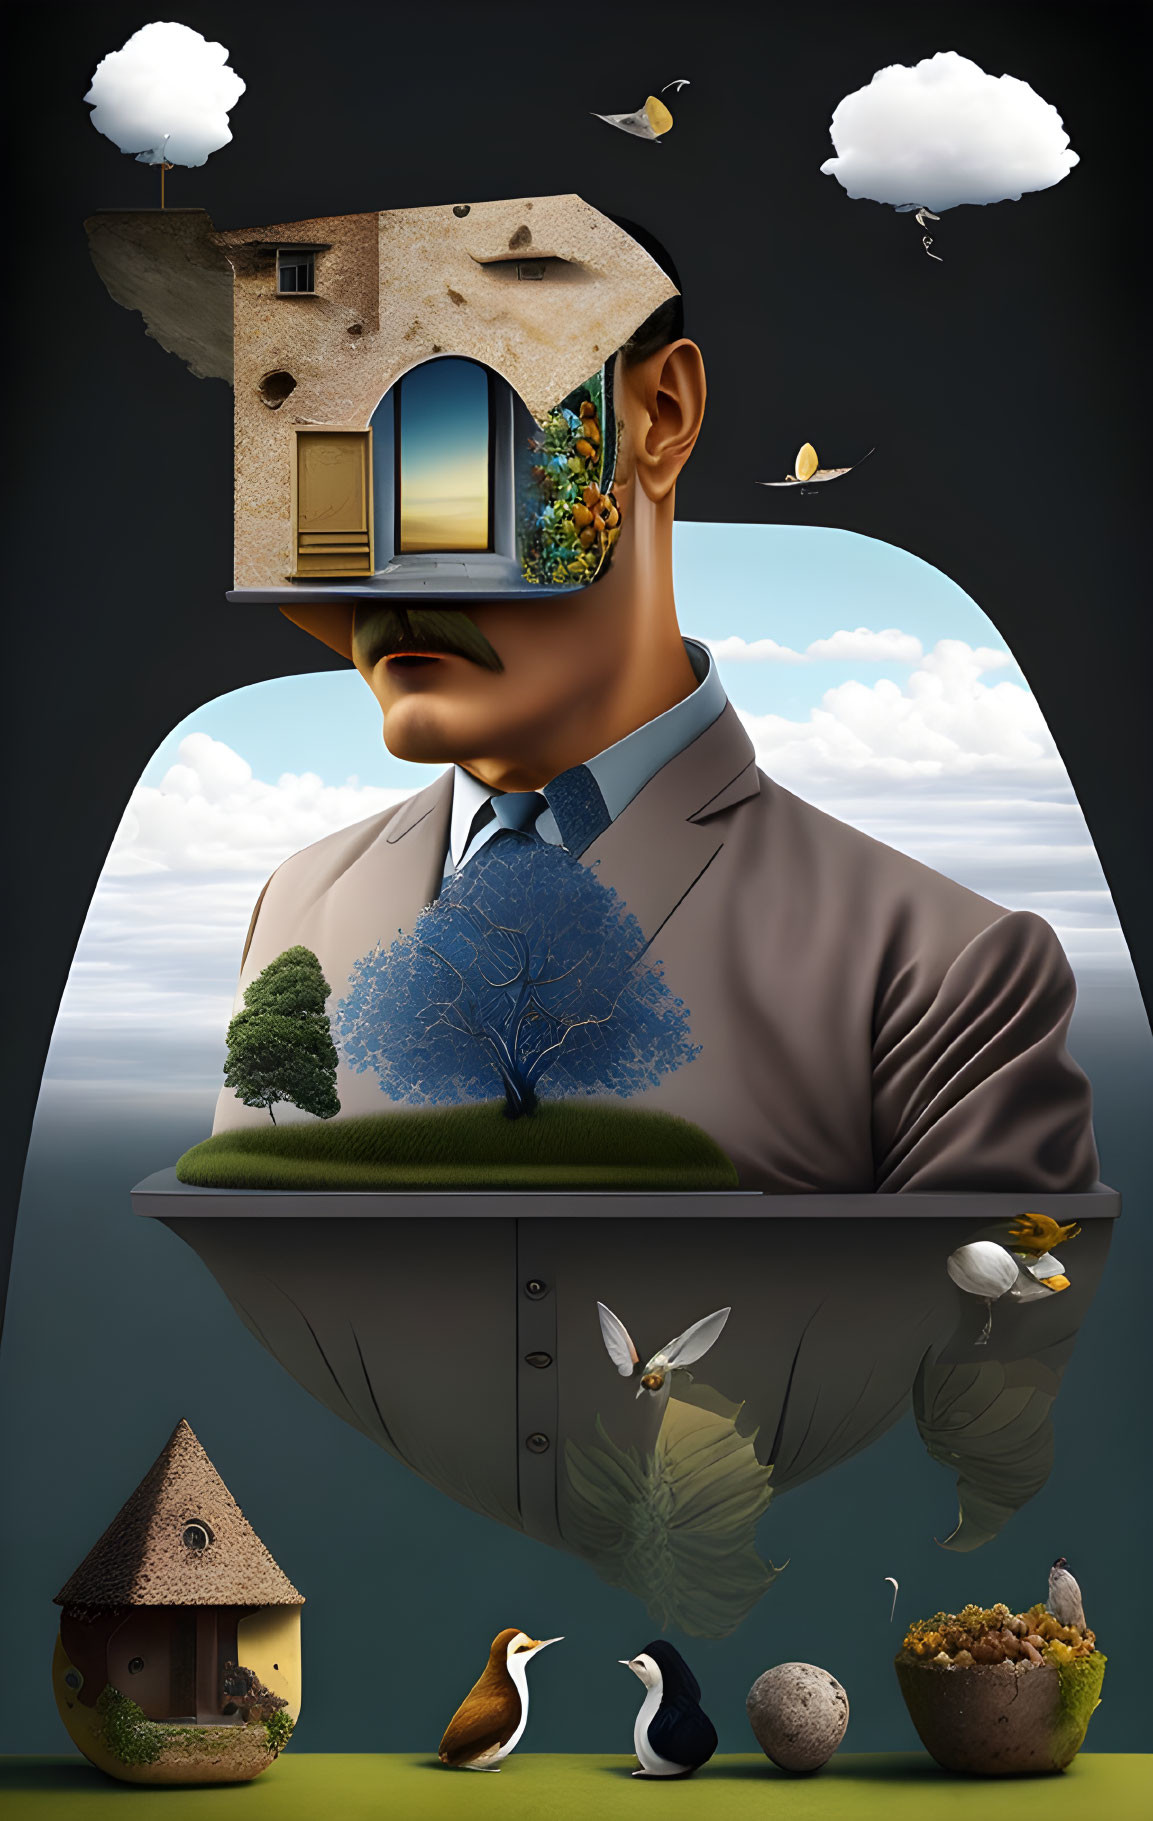 Man's portrait merged with landscape elements: house head, tree shirt, nature reflection